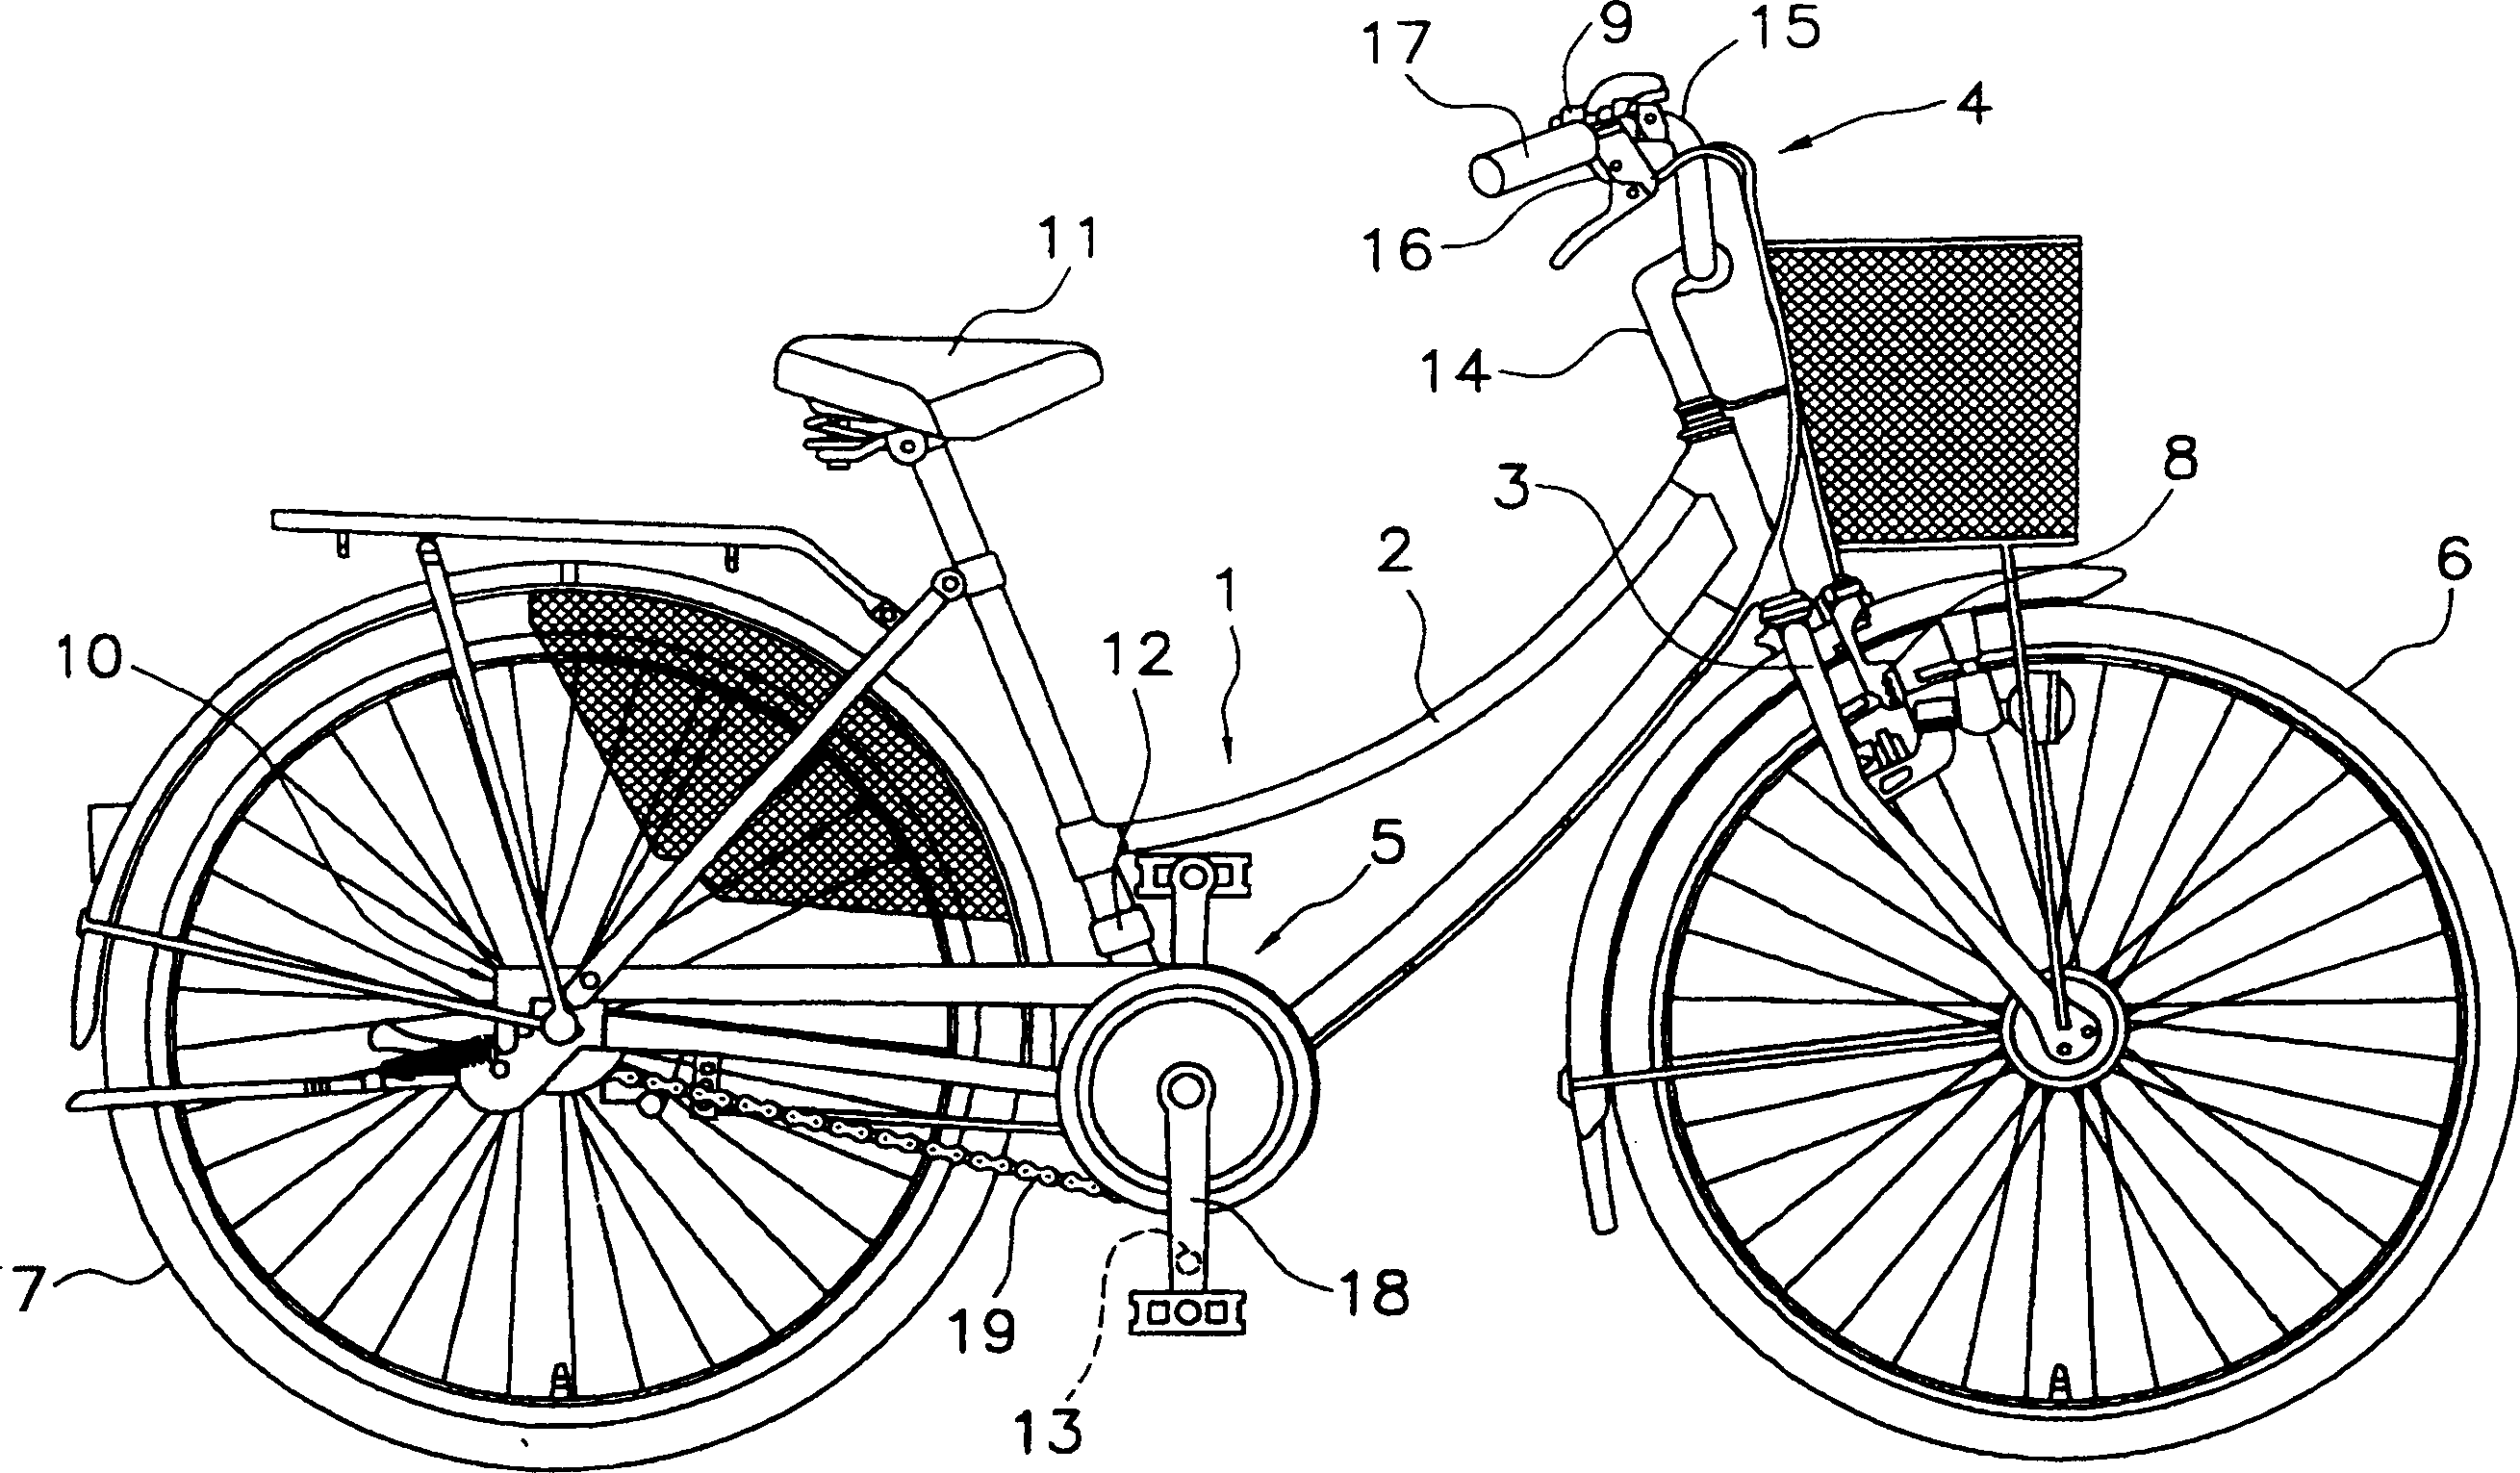 Automatic variable speed controller and method for bicycle